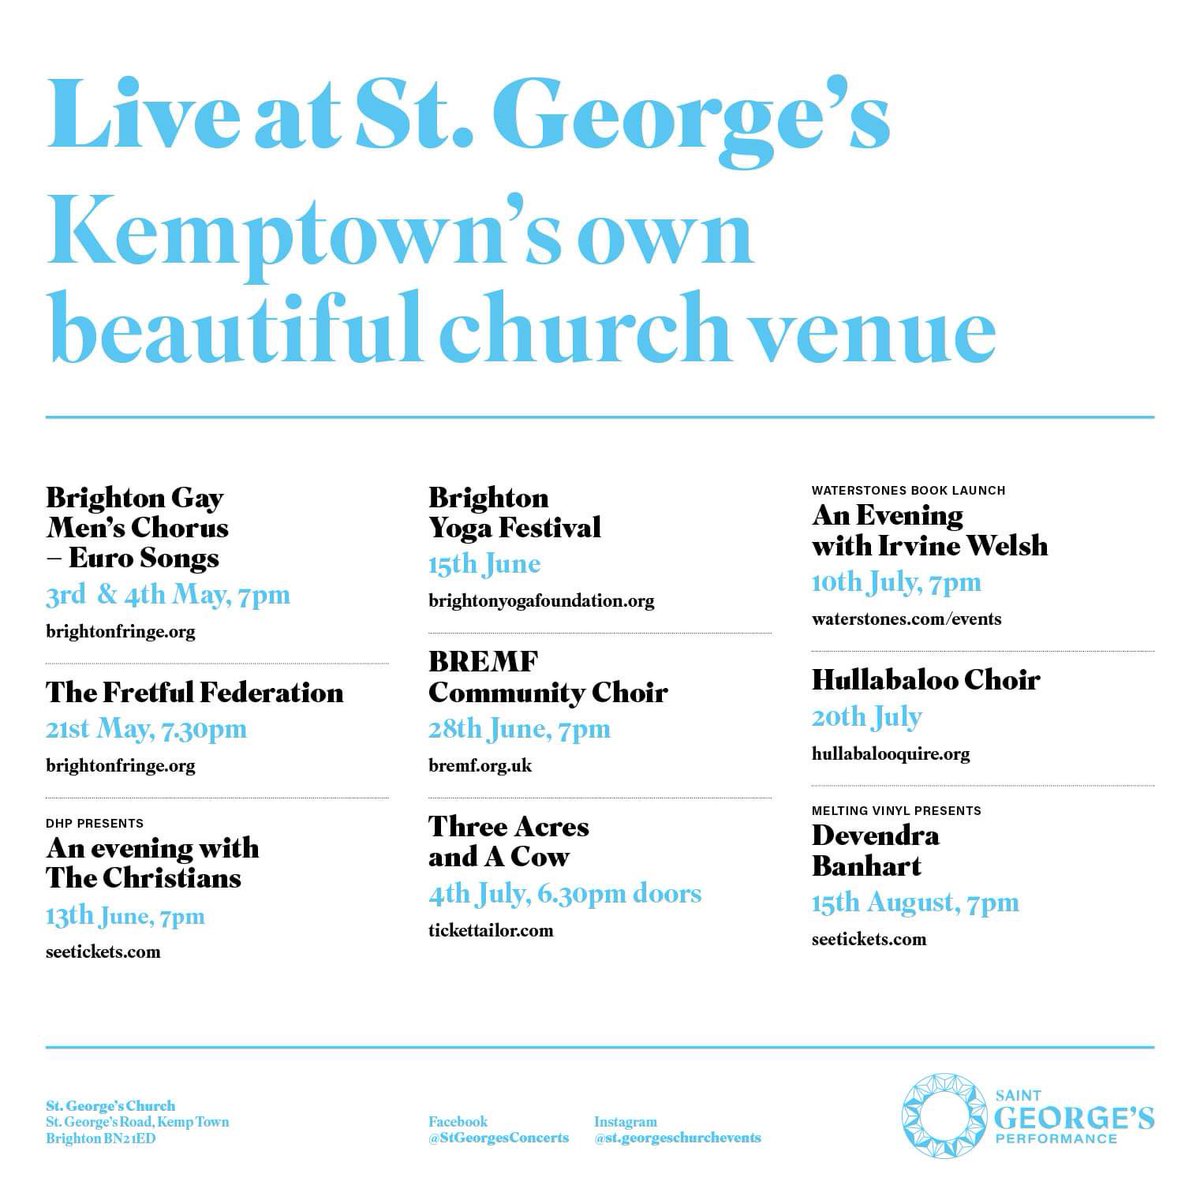 From euro pop songs to yoga festivals to freak folk performers there is something for everyone in our stunning Church space #kemptownevents #eventsinchurches